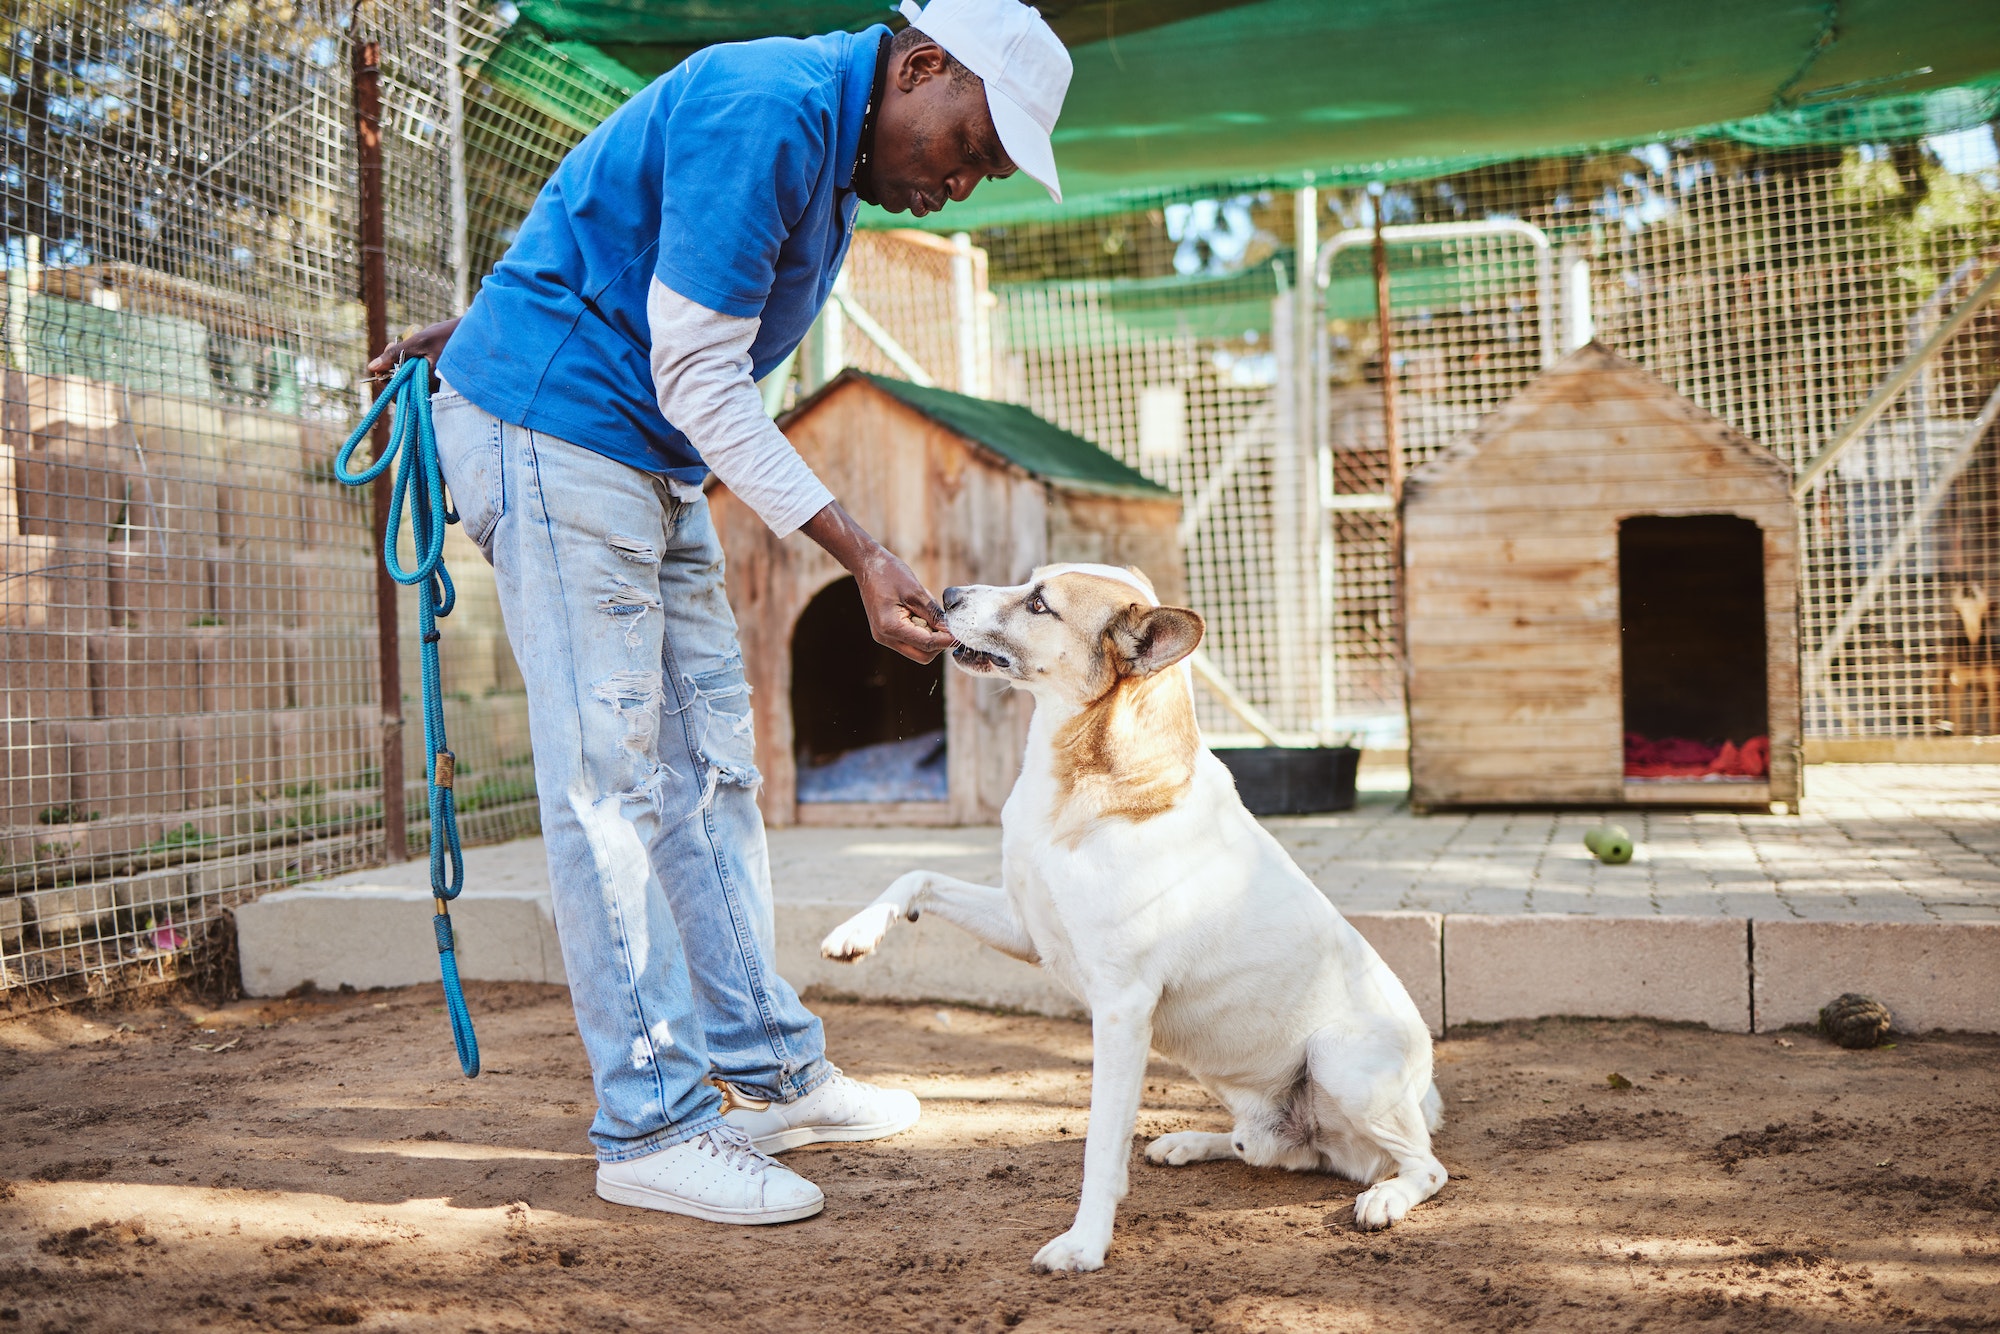 Dog, food and training for animal adoption with professional black worker at shelter for rescue and